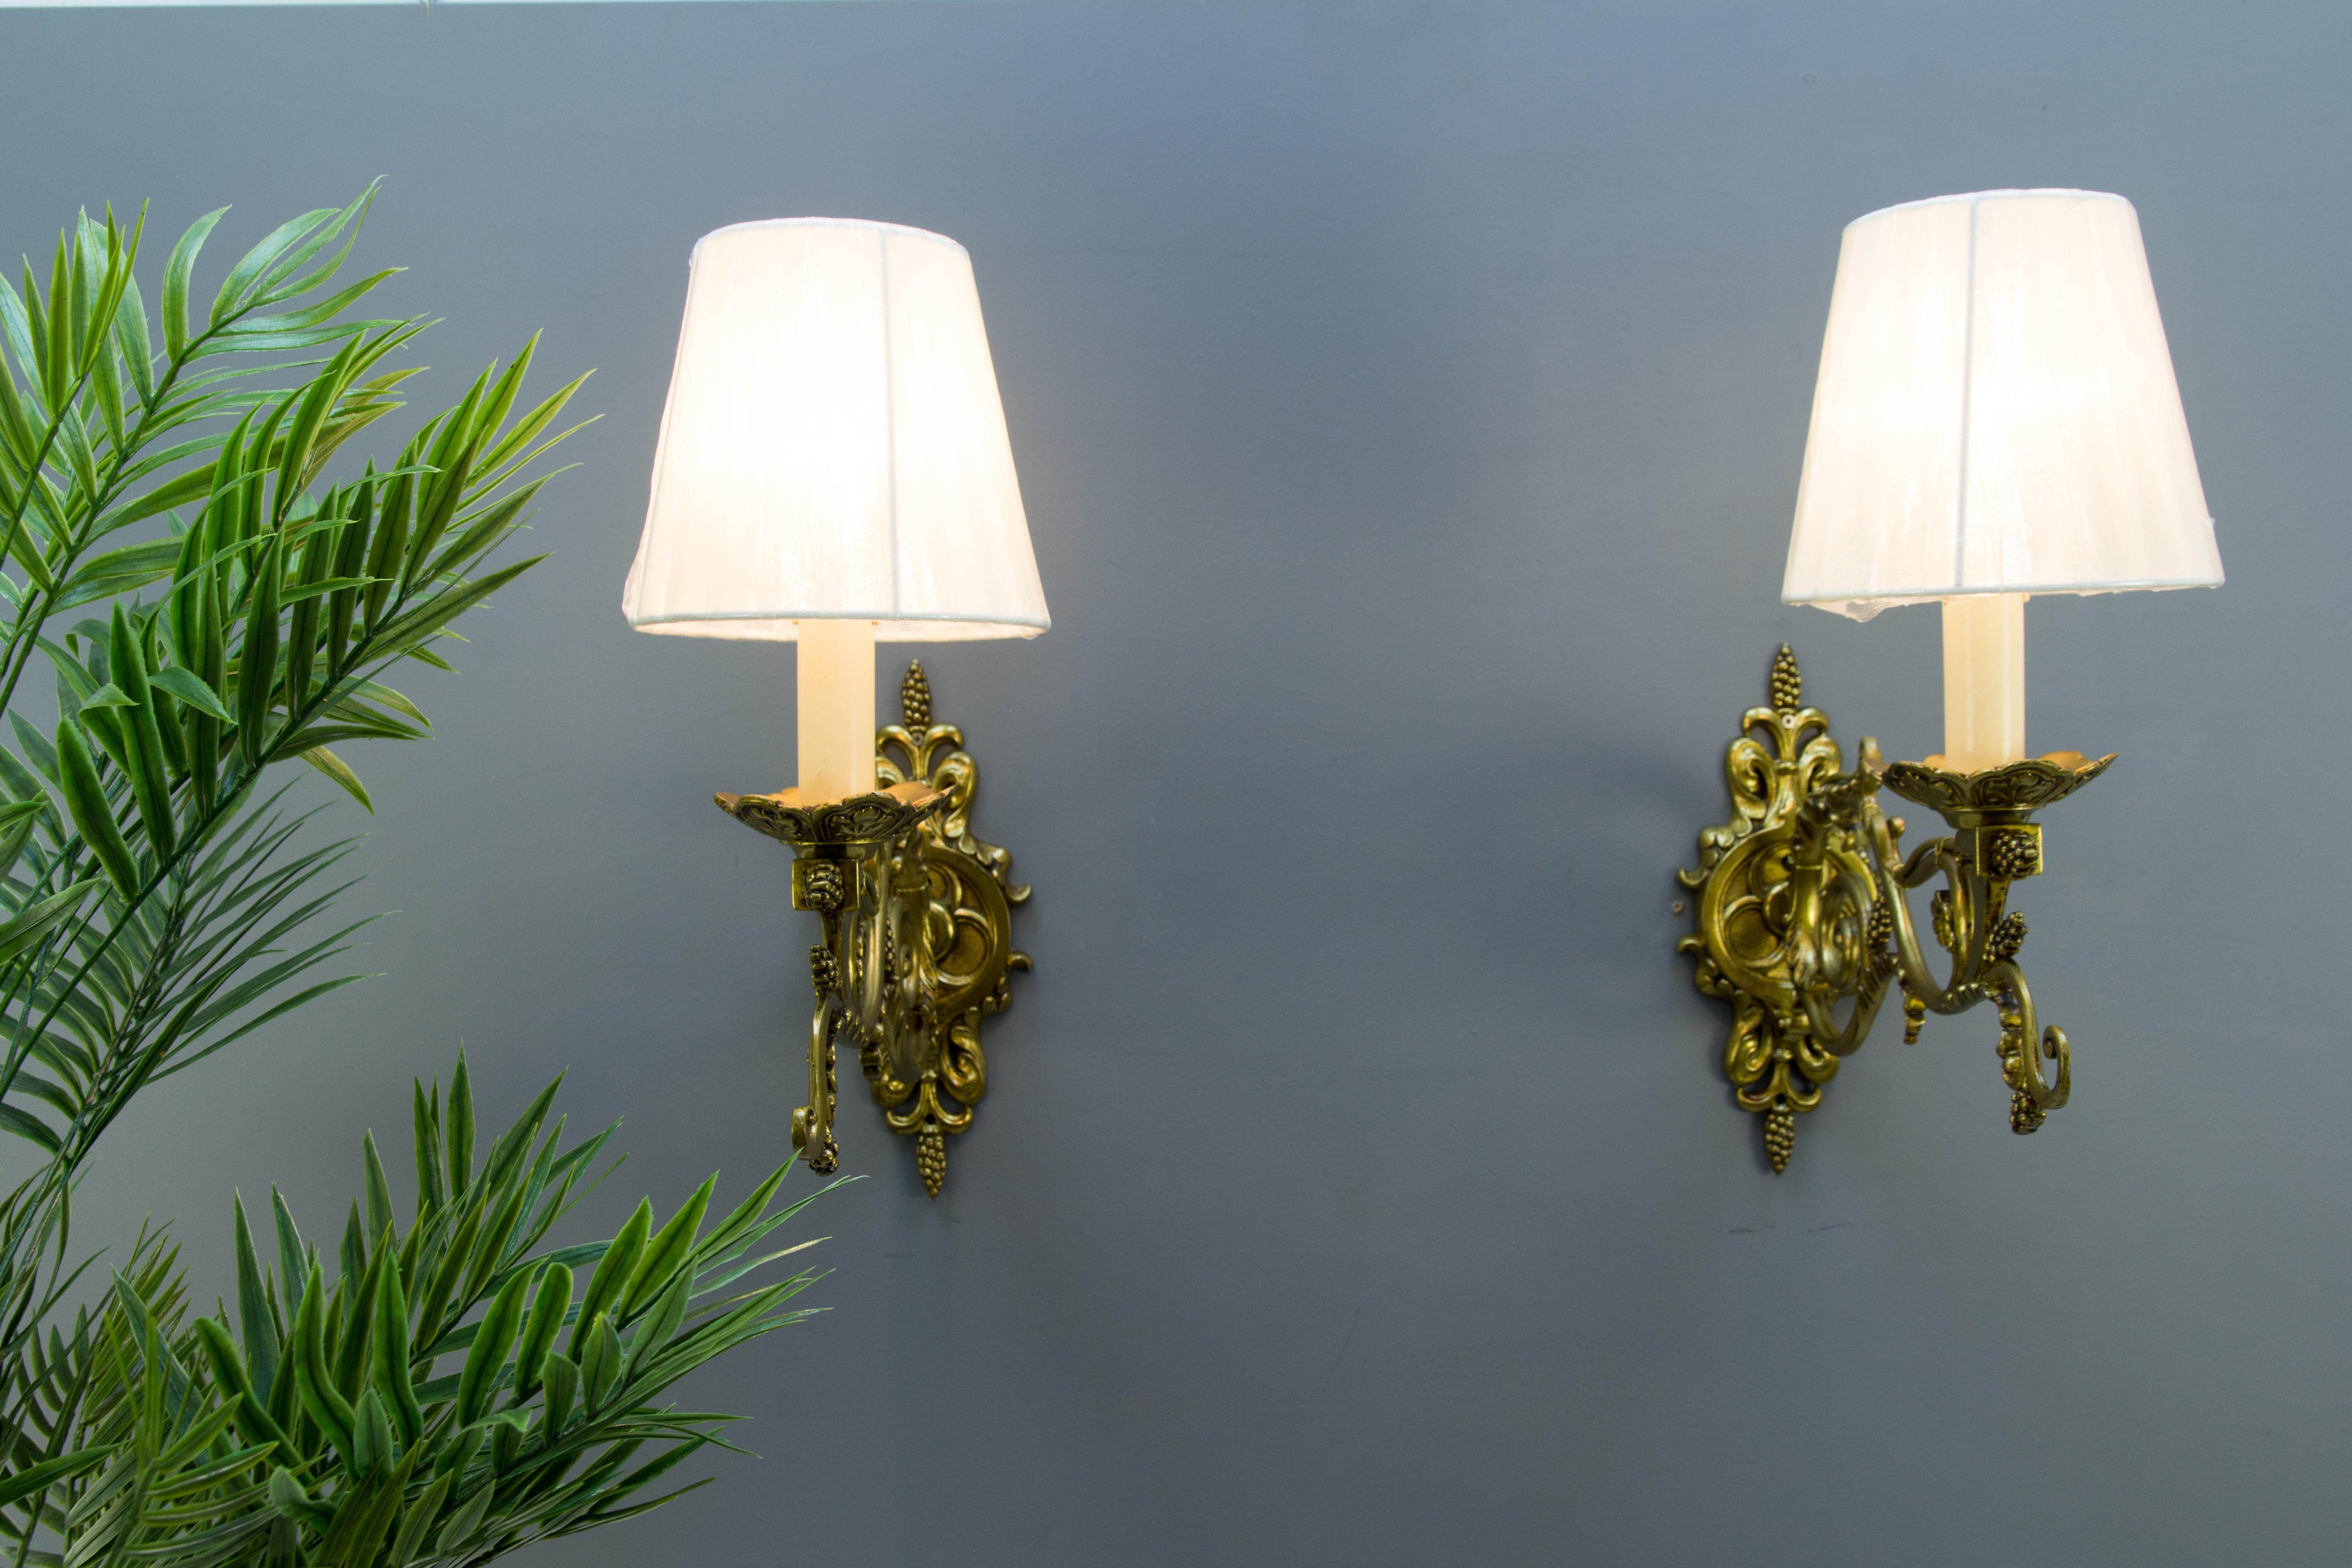 A beautiful pair of French Louis XVI-style wall lights. Made of bronze in the shape of large scrolls and decorated with elegant foliate motifs. Each sconce has one socket for the E14 size light bulb and a new fabric lampshade.
Dimensions (each